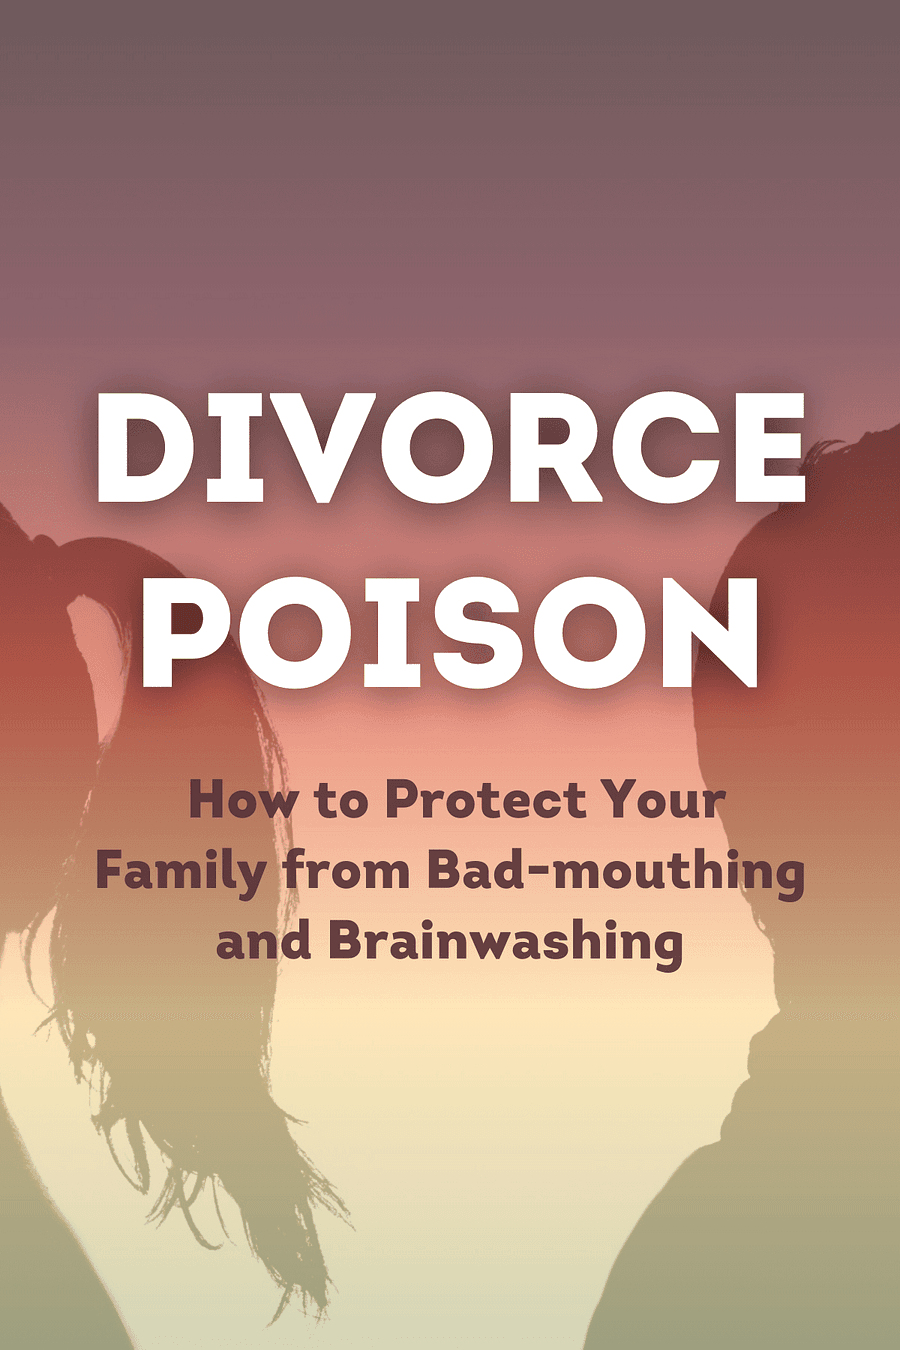 Divorce Poison New and Updated Edition by Dr. Richard A. Warshak - Book Summary